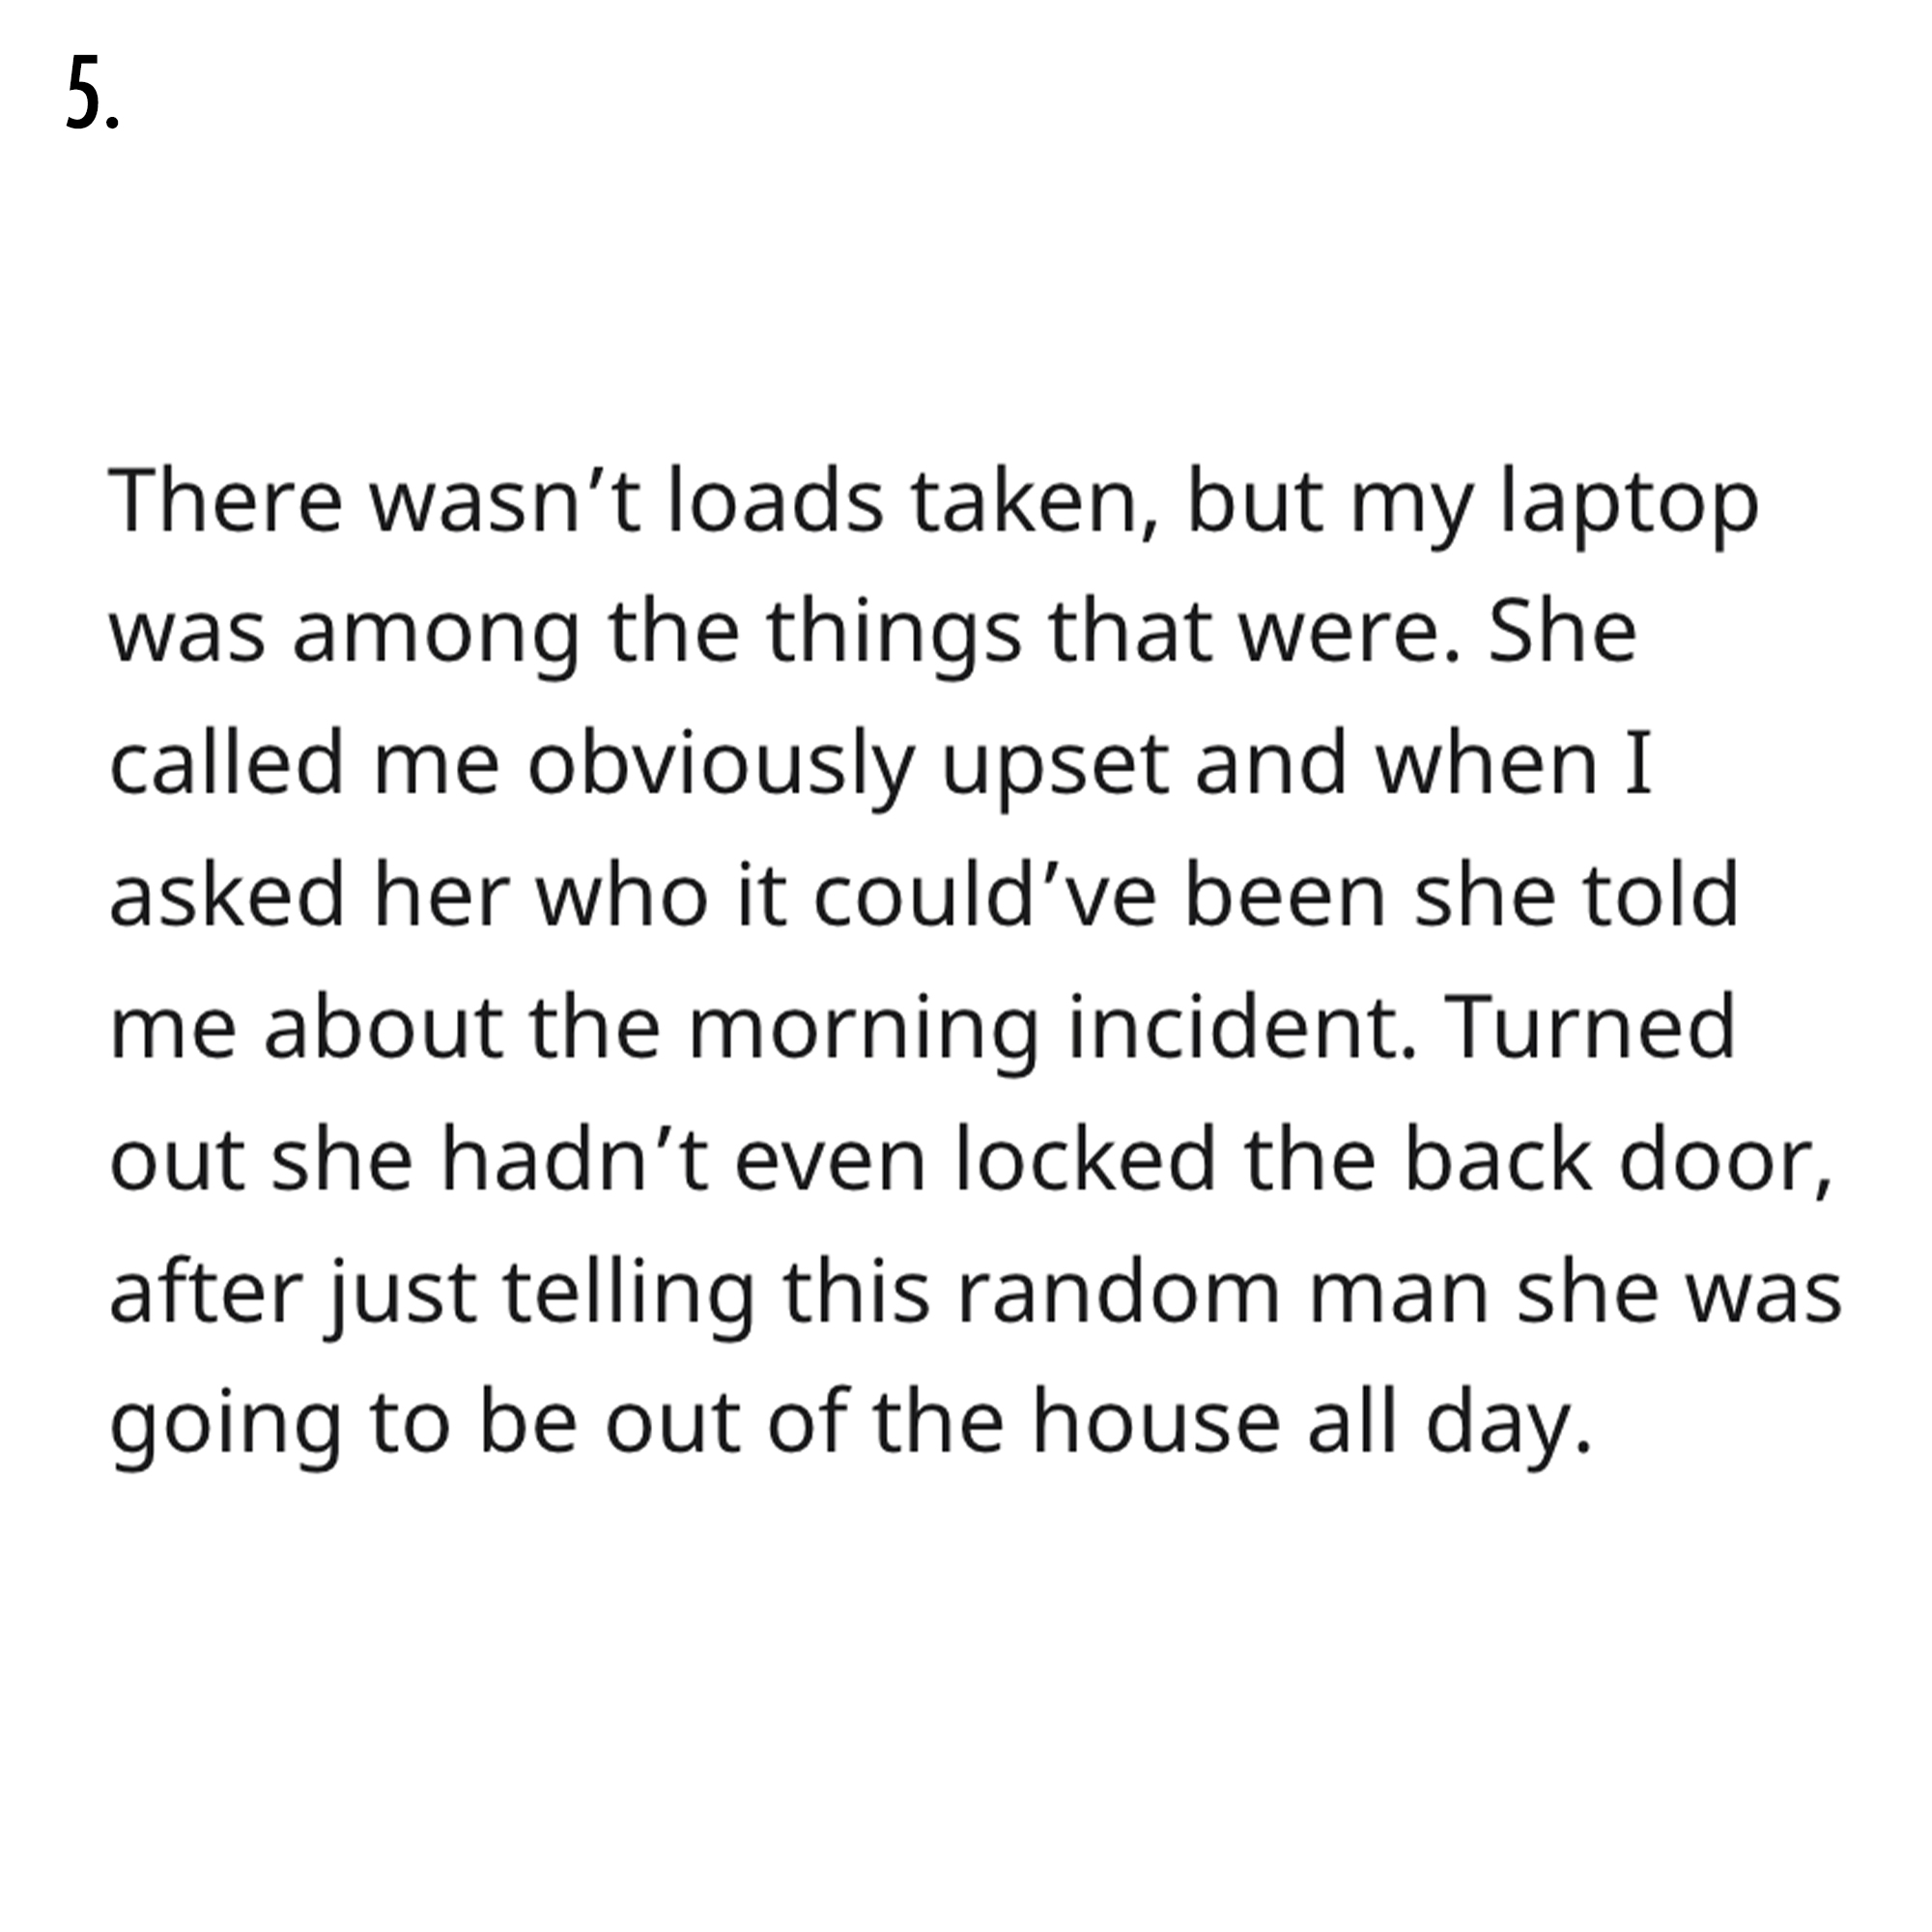 AITA Reddit Story - Reflexivity - 5. There wasn't loads taken, but my laptop was among the things that were. She called me obviously upset and when I asked her who it could've been she told me about the morning incident. Turned out she hadn't even locked 